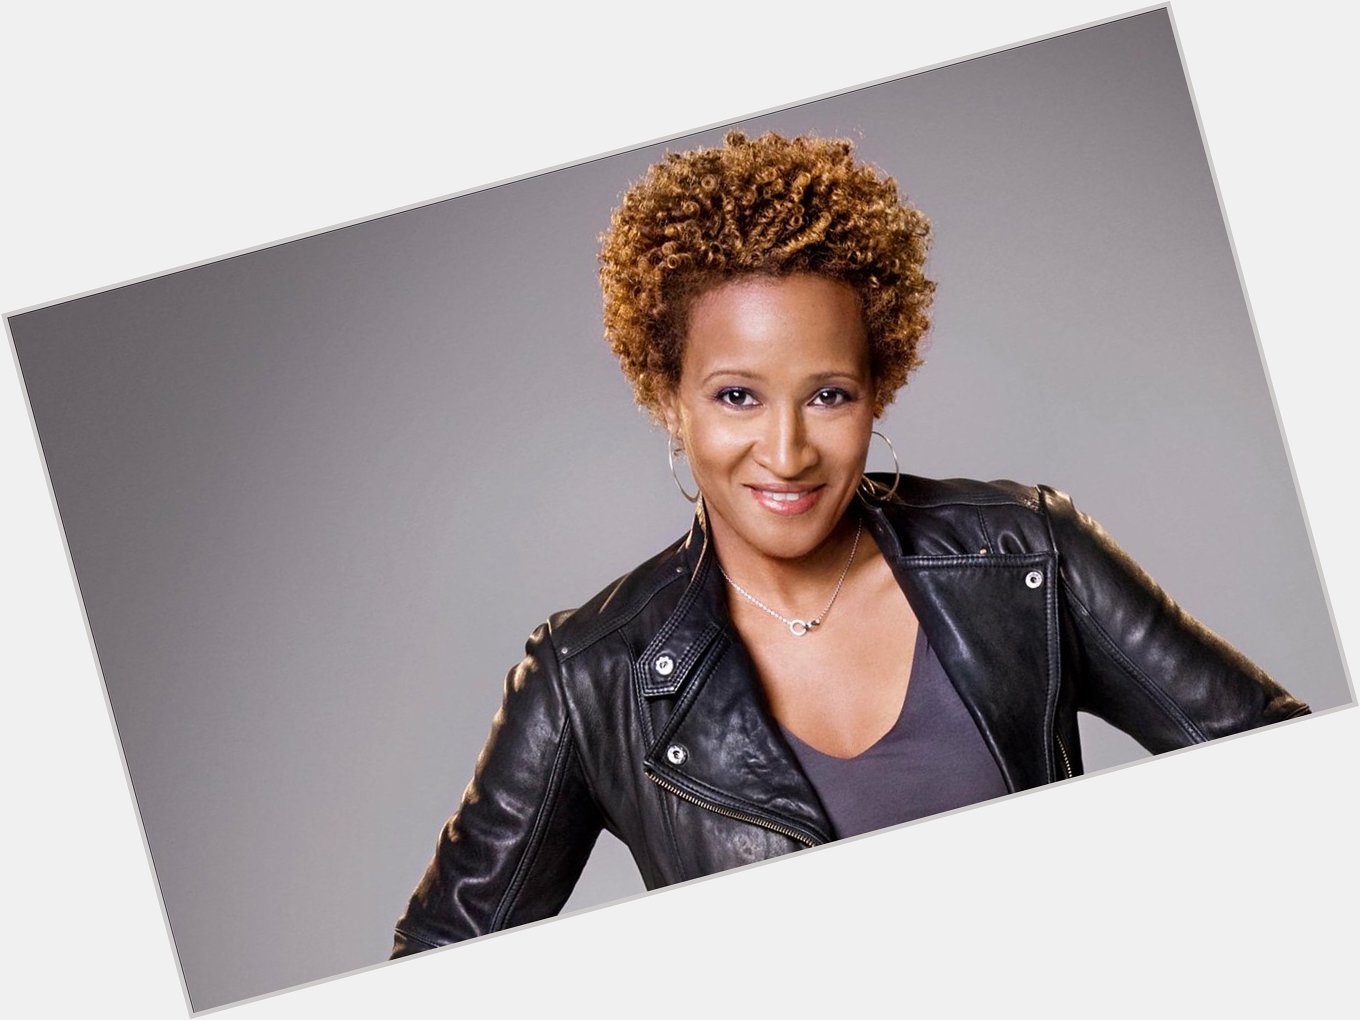 Happy Birthday to comedian, writer, actress and voice artist, Wanda Sykes from  